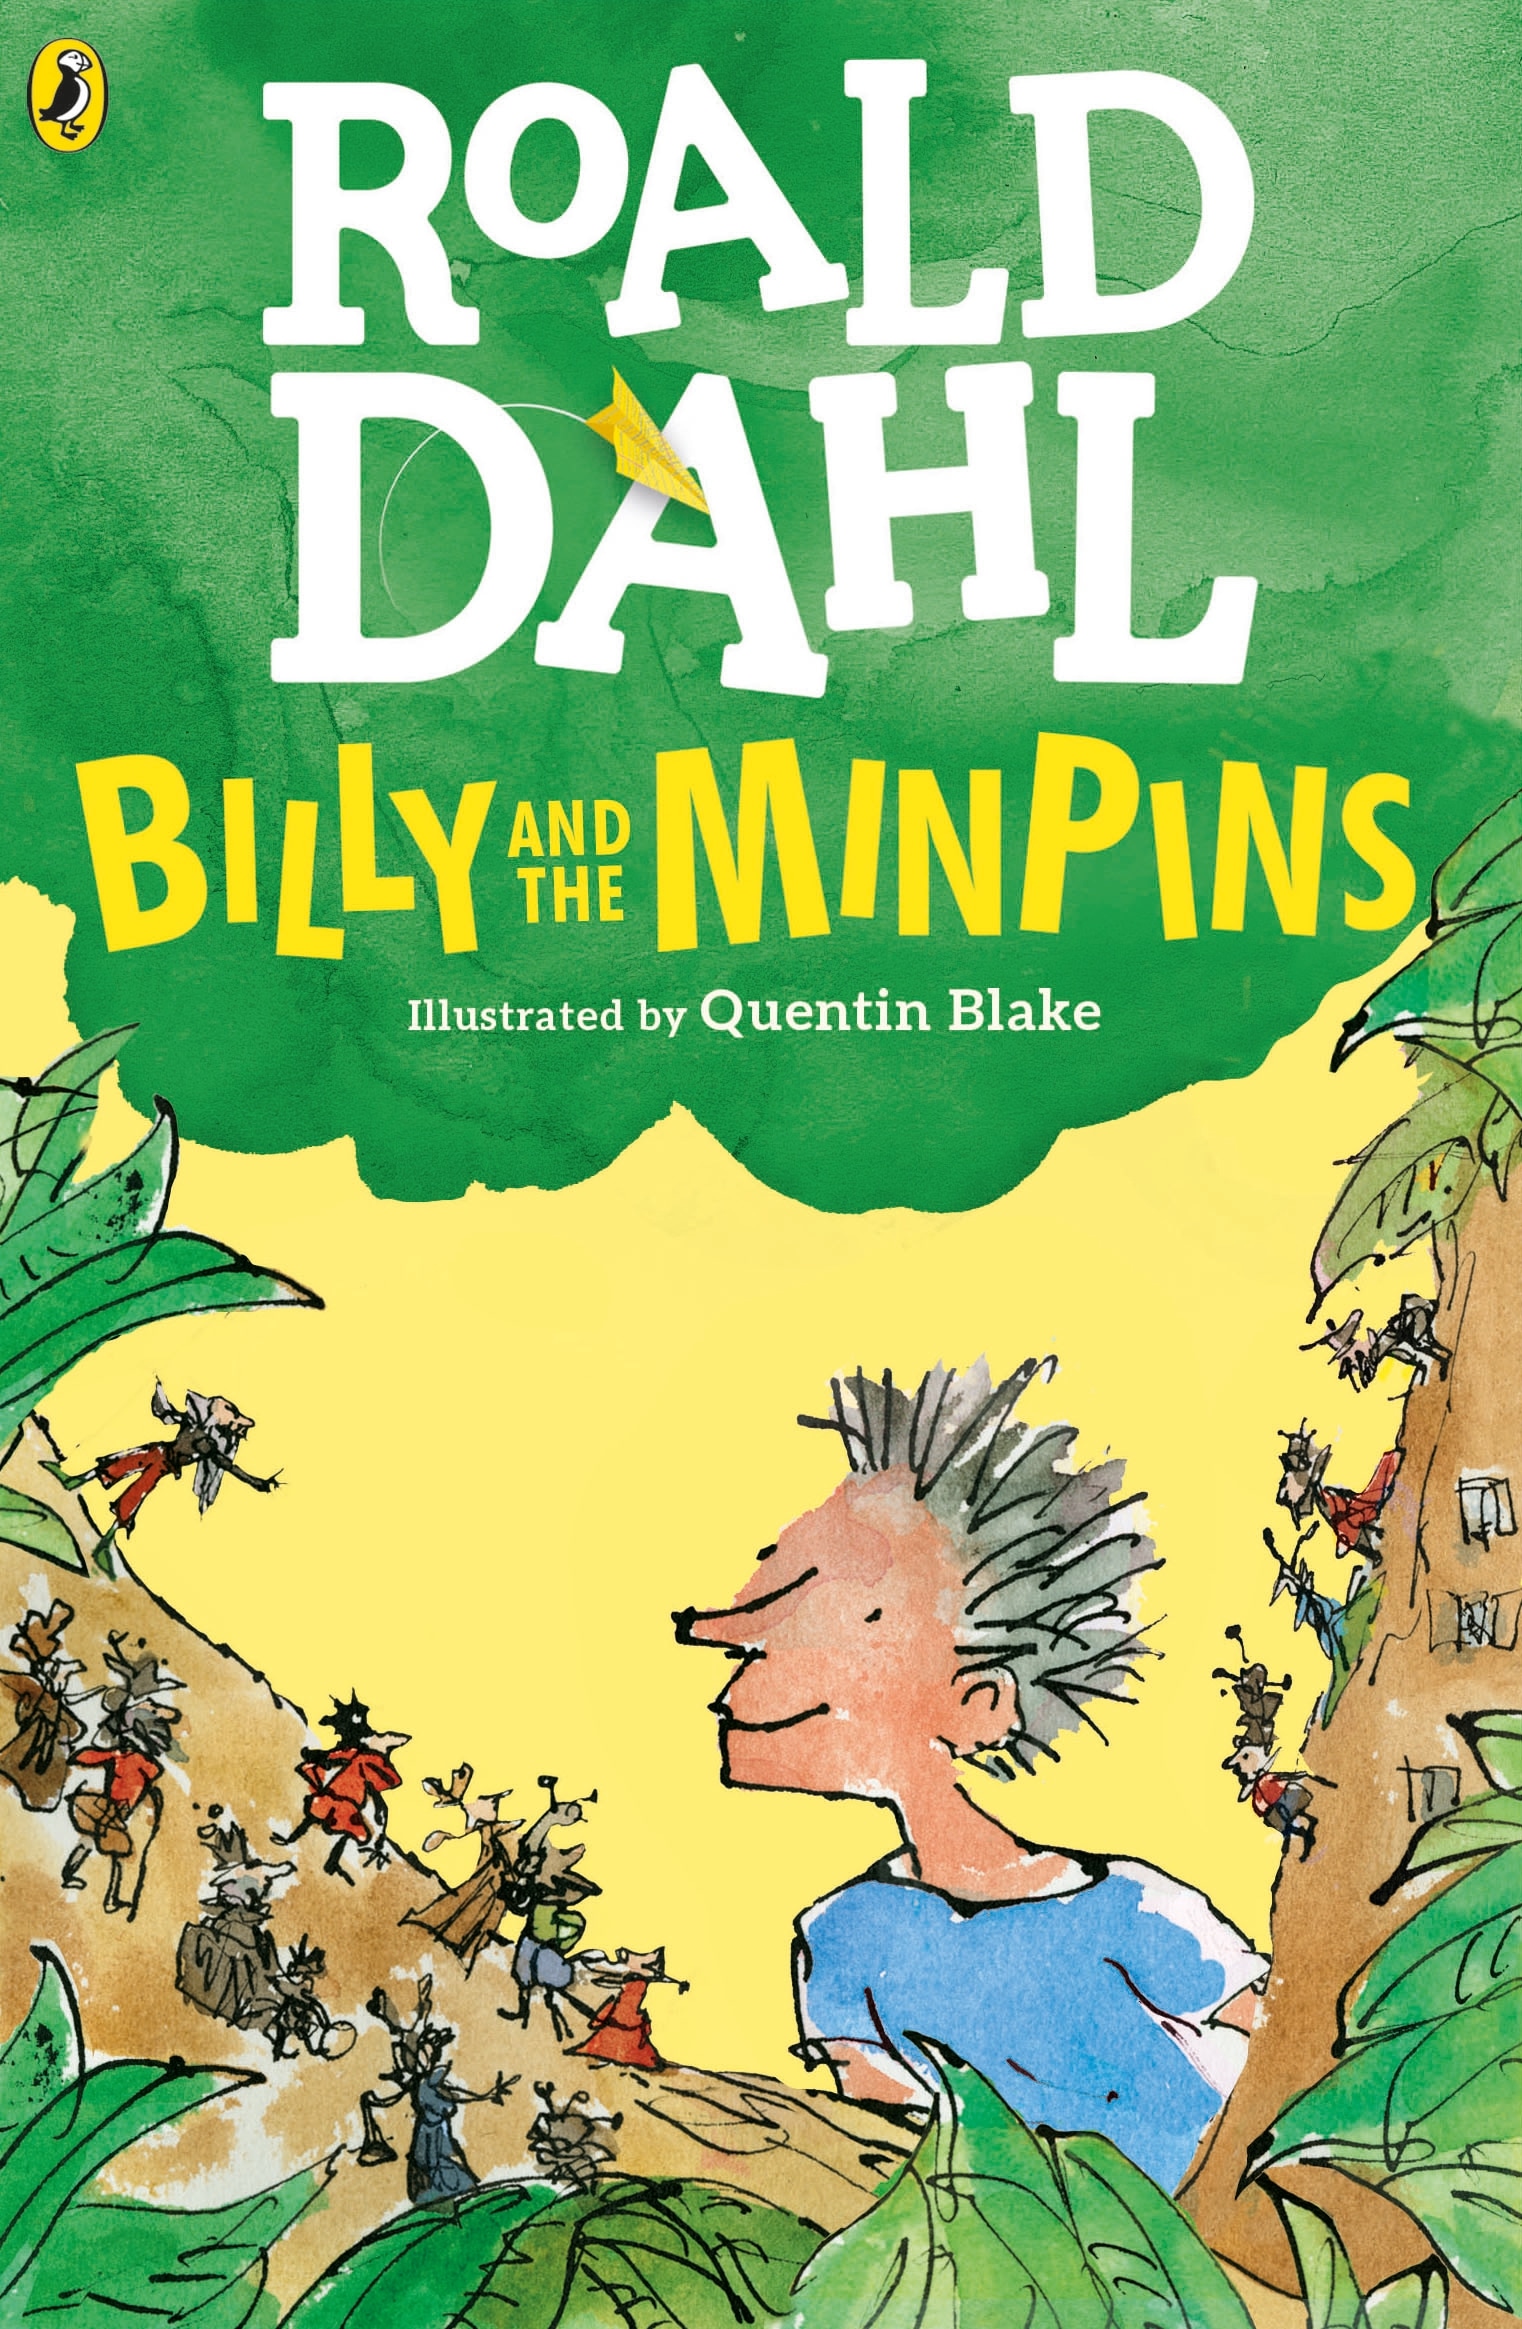 Книга «Billy and the Minpins (illustrated by Quentin Blake)» Roald Dahl — 6 сентября 2018 г.